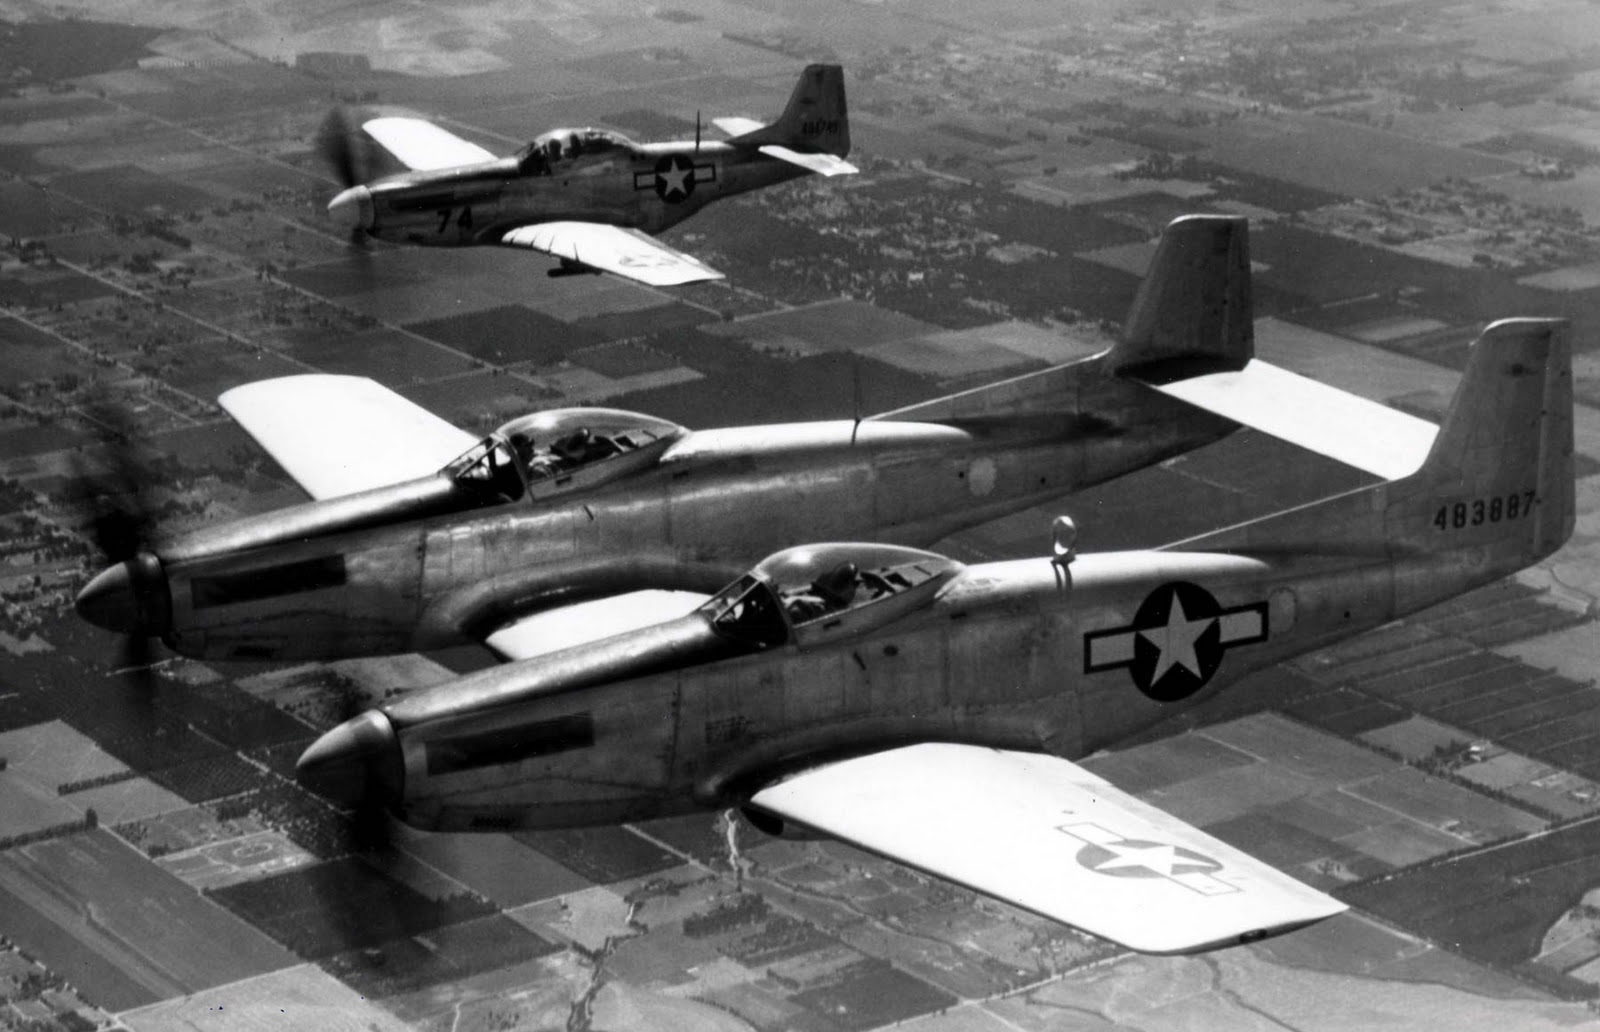 This XP-82 shown during its first flight in 1945, in formation with a famed P-51 "Mustang" fighter on which the XP-82 airframe was based.